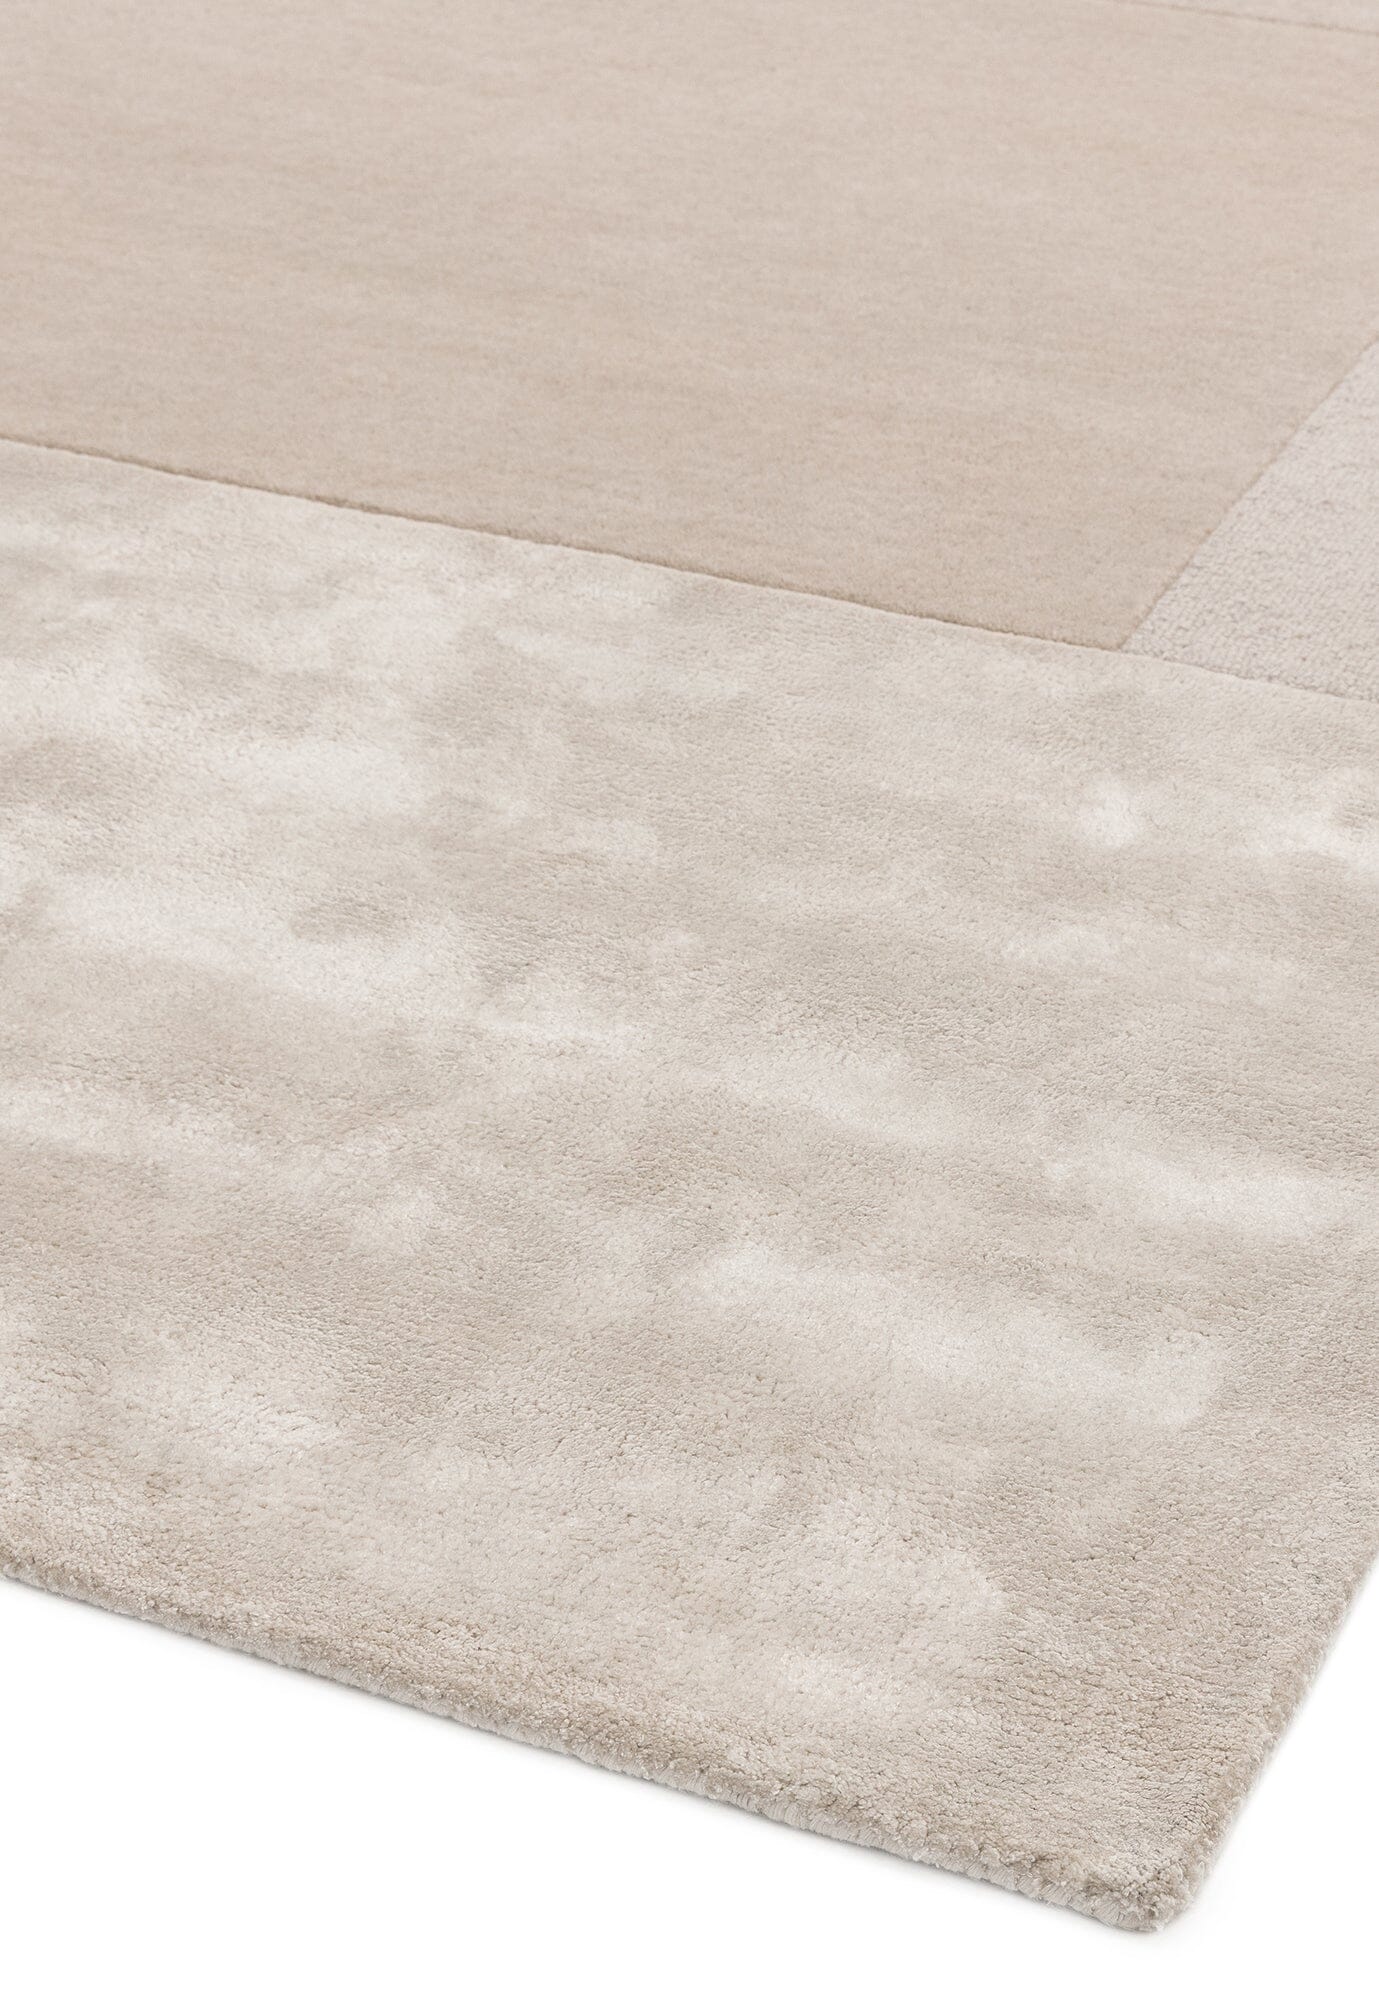  Asiatic Carpets-Asiatic Carpets Tate Tonal Textures Hand Tufted Rug Ivory - 160 x 230cm-Cream, White 077 